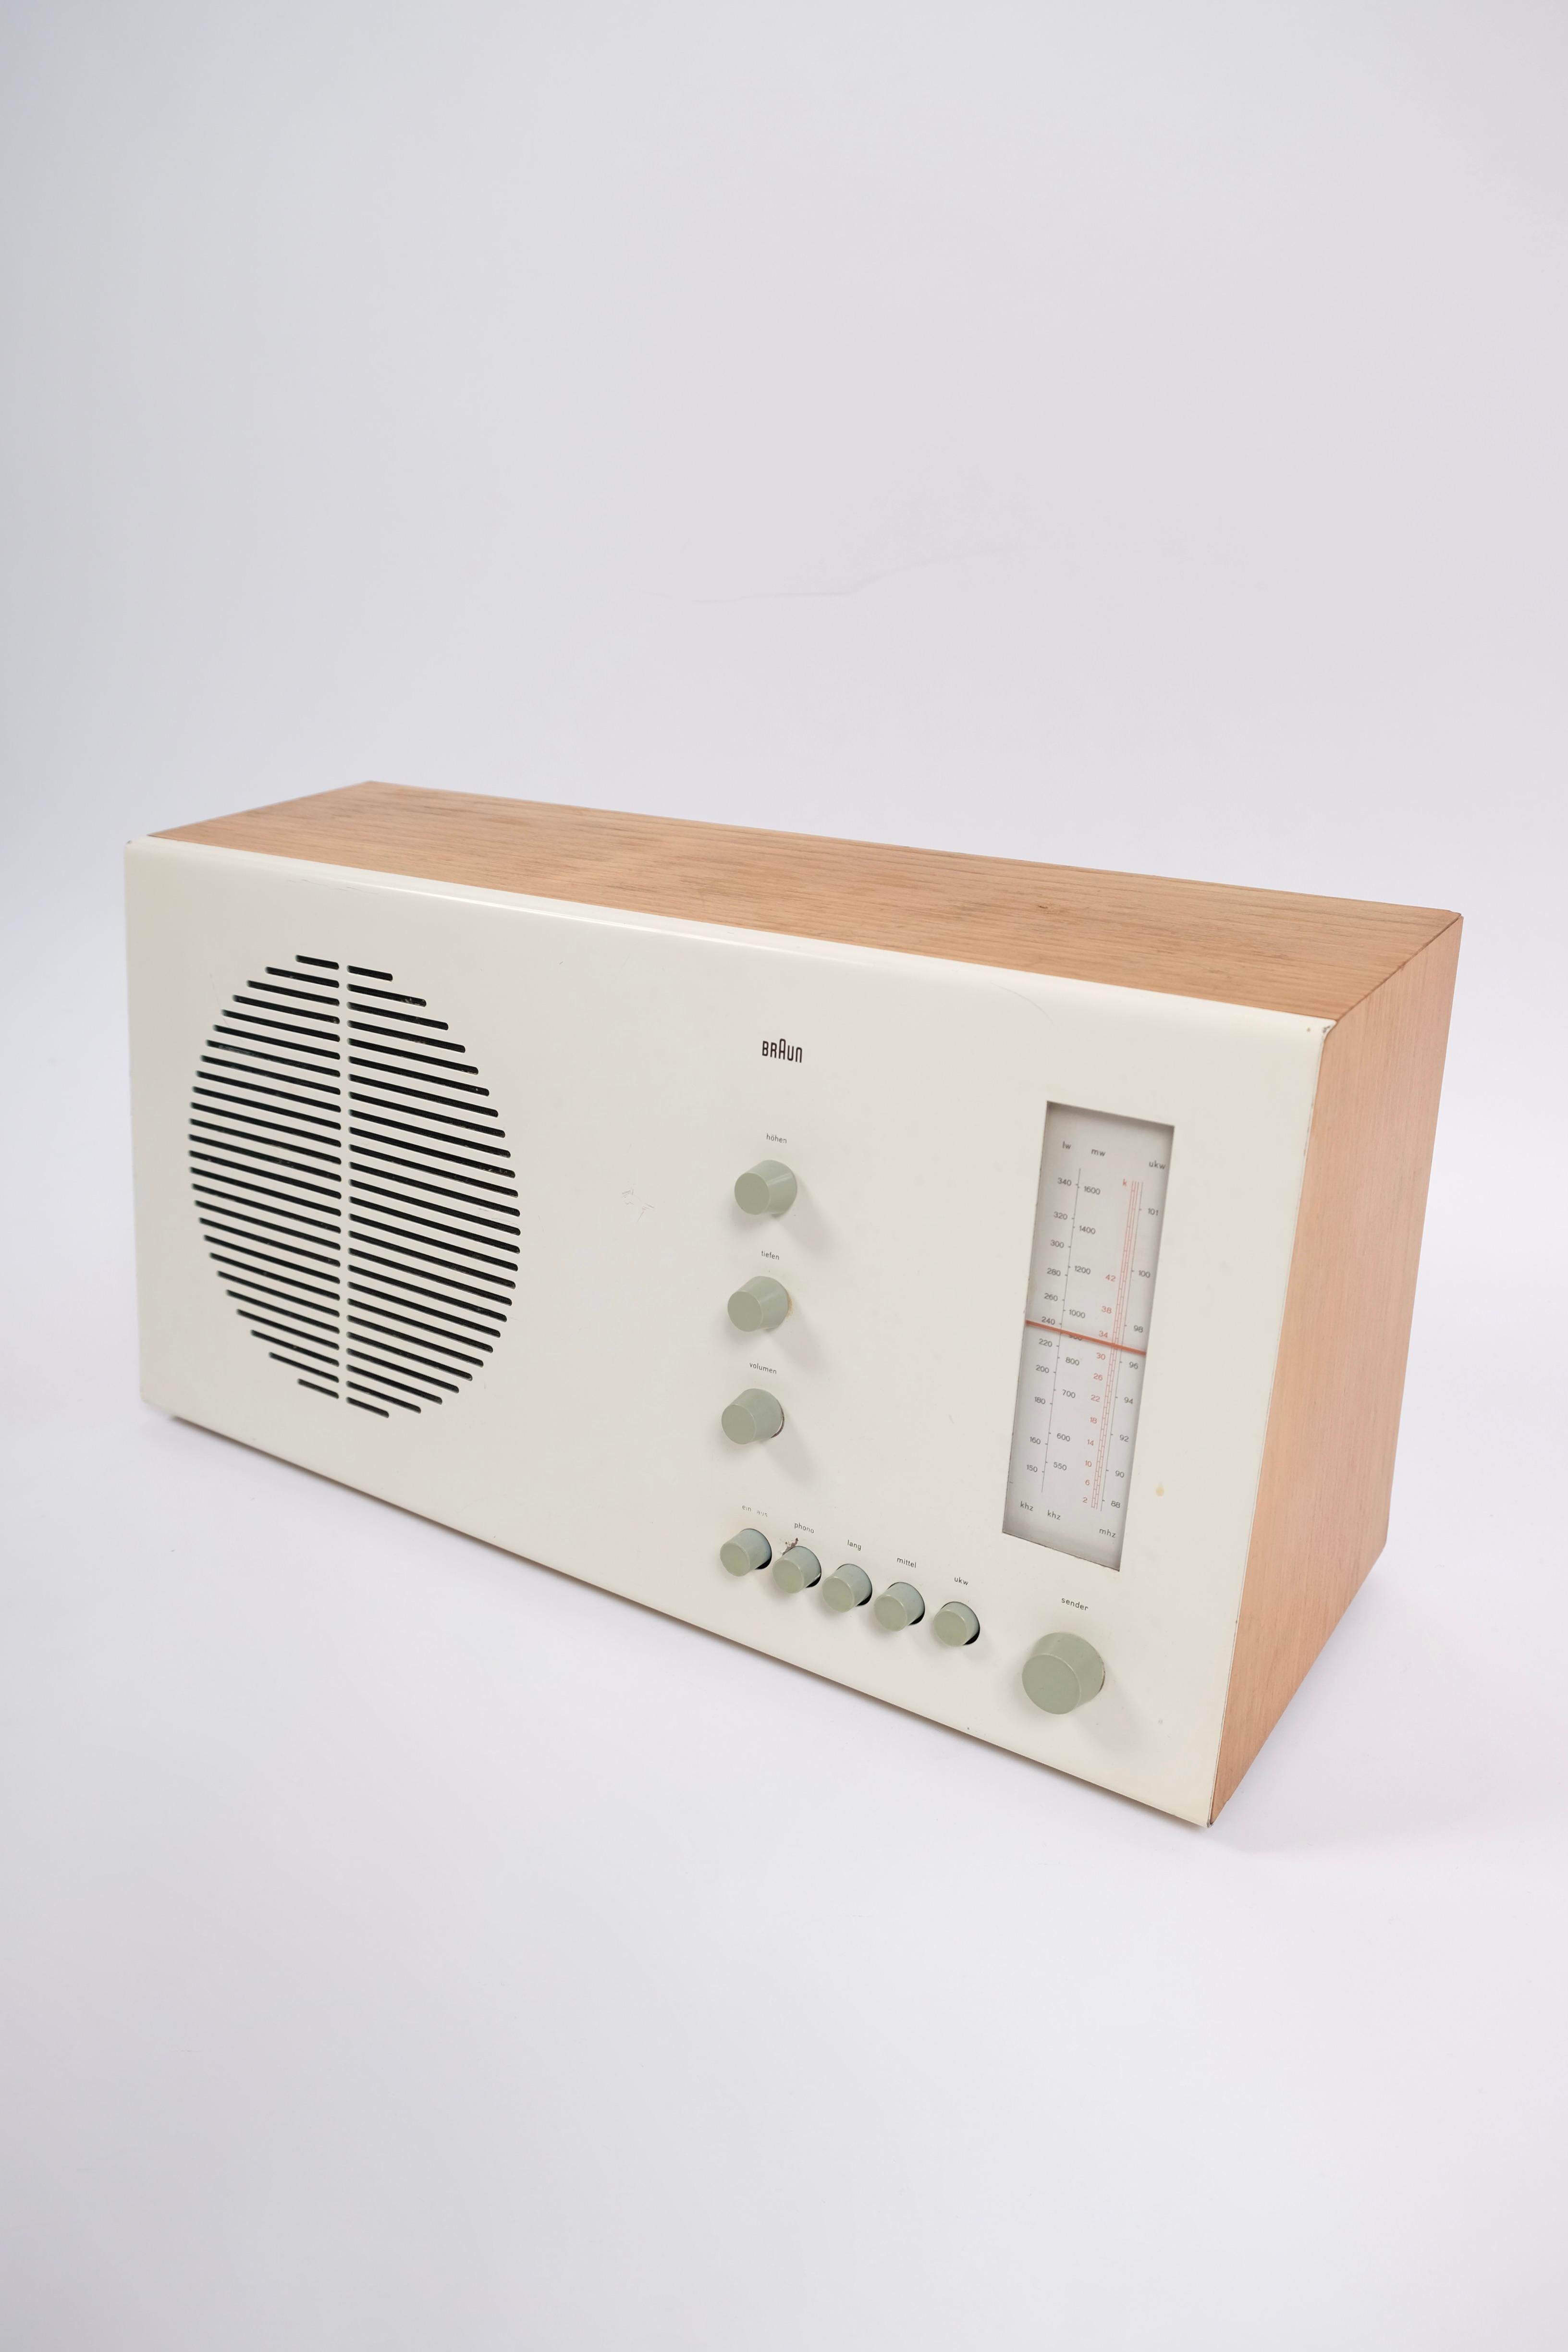 Cult classic design RT 20 radio by the minimalist Dieter Rams.

The Radio is in working order with european electric plug.